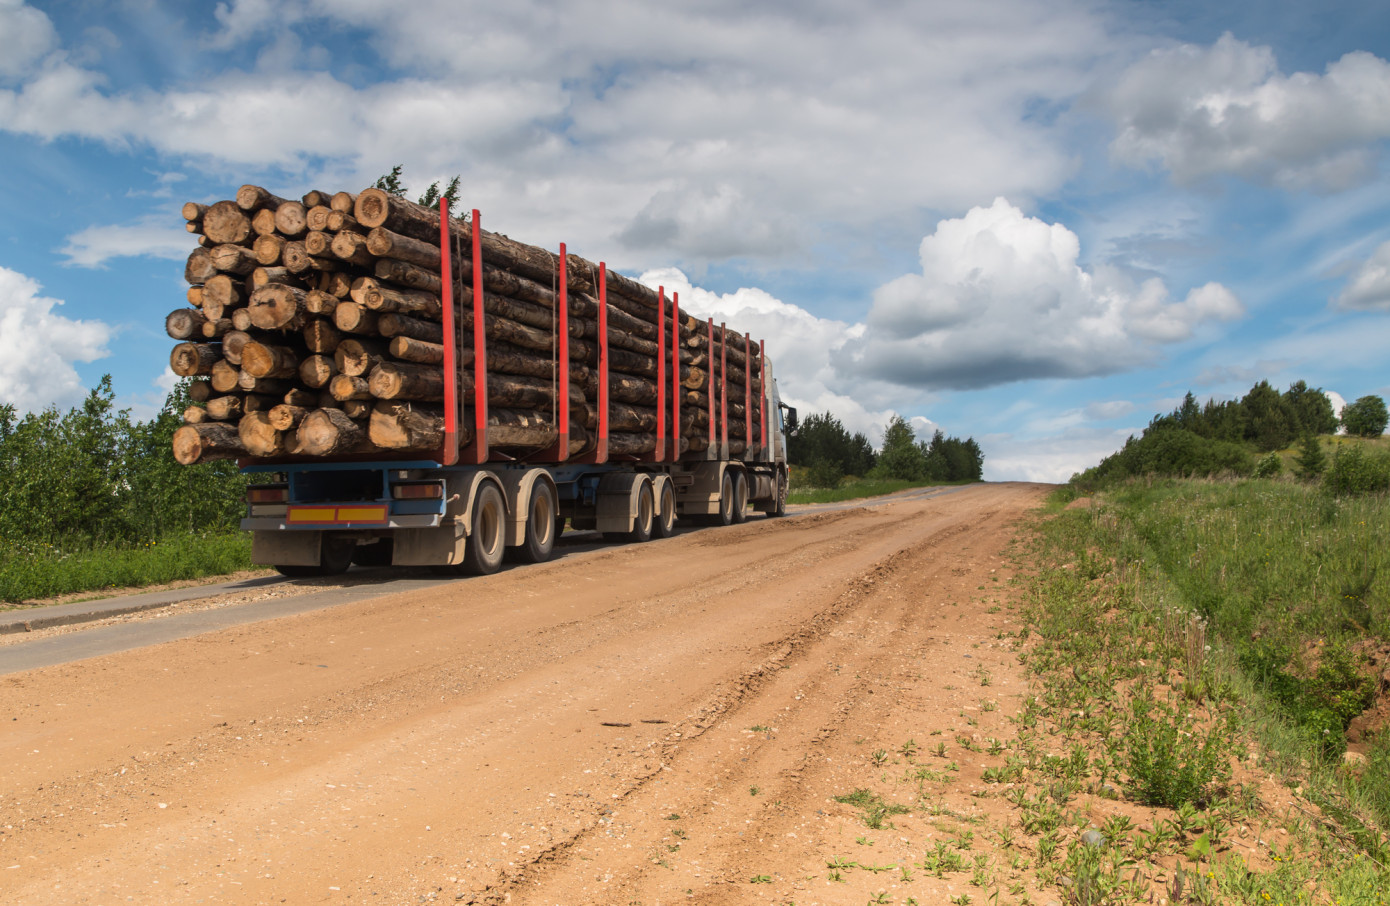 In February, exports of log from Russia to EU fall 43%, plywood 41%